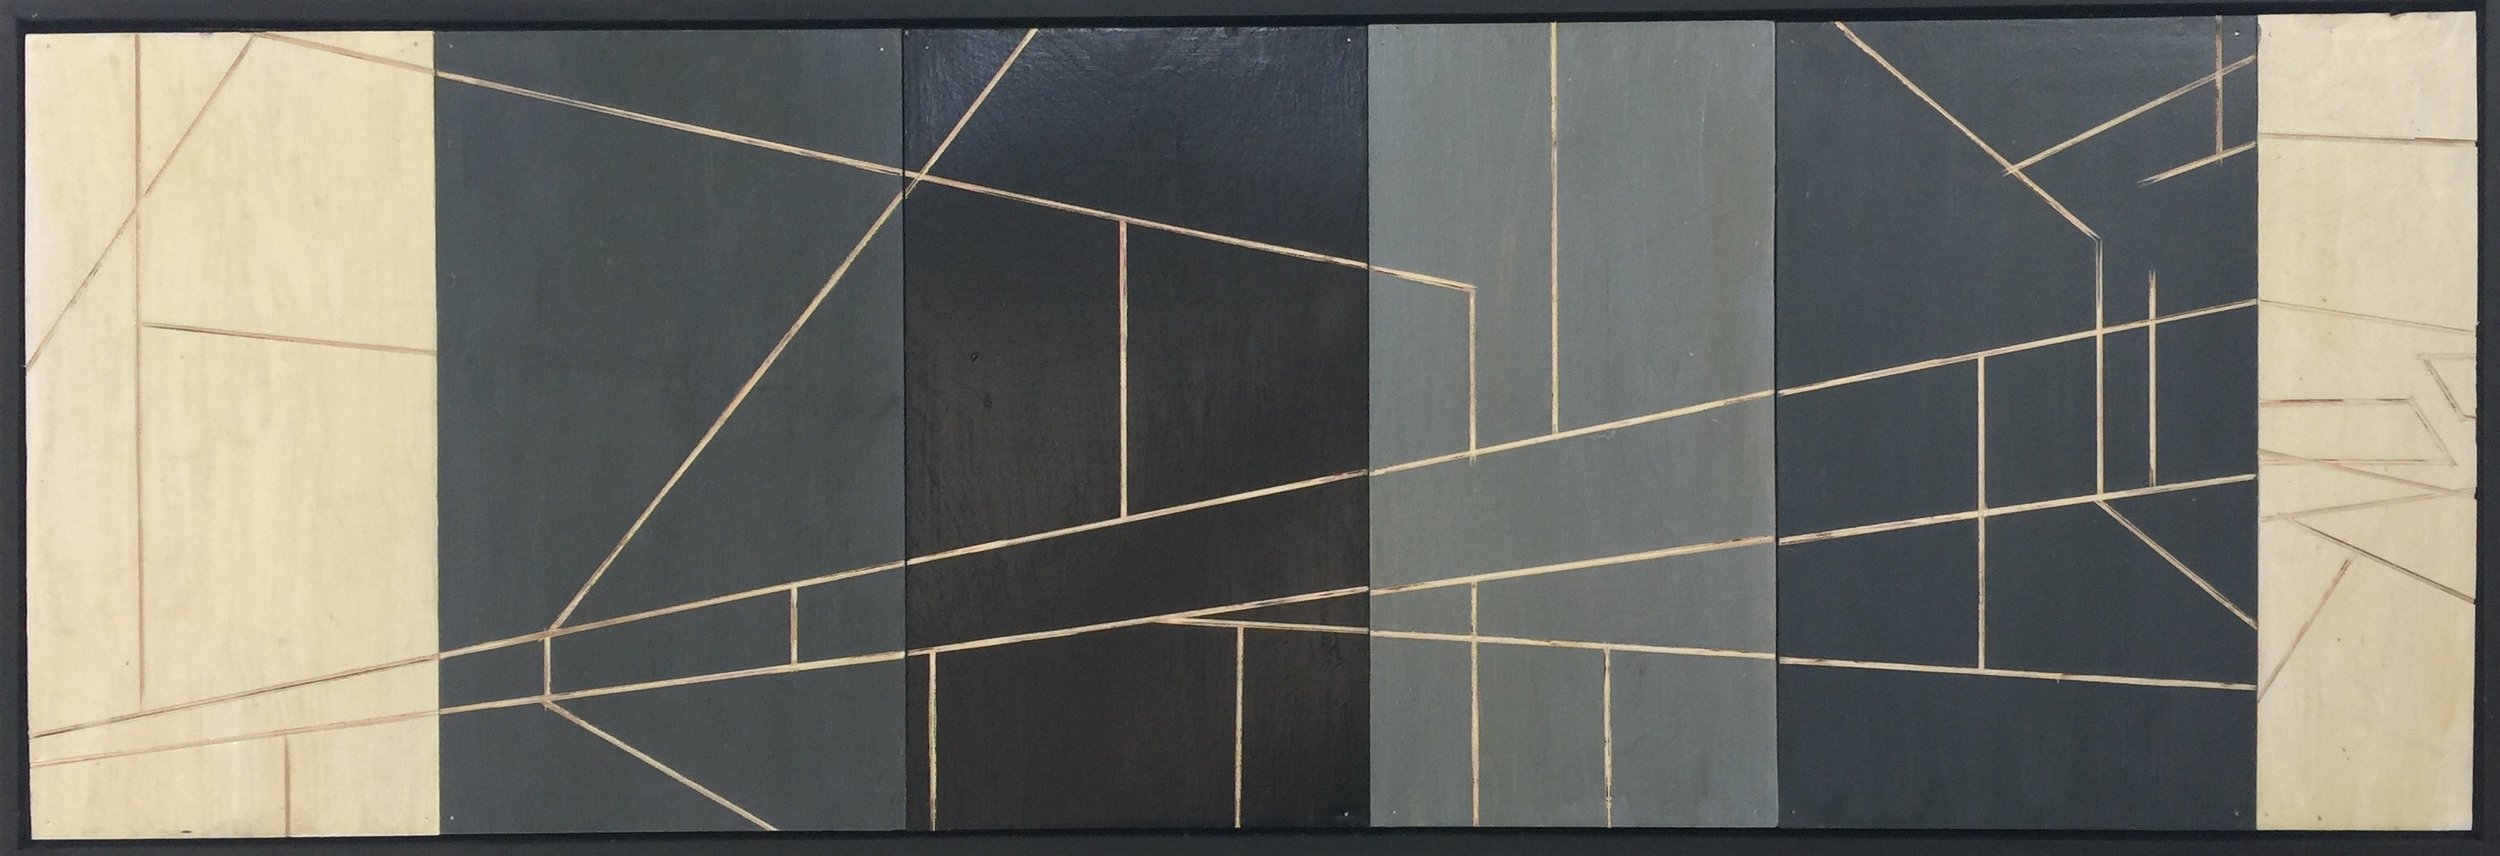 Composition on Panel, 2017, oil on incised board, 49.5 x 175.8 in, $4500